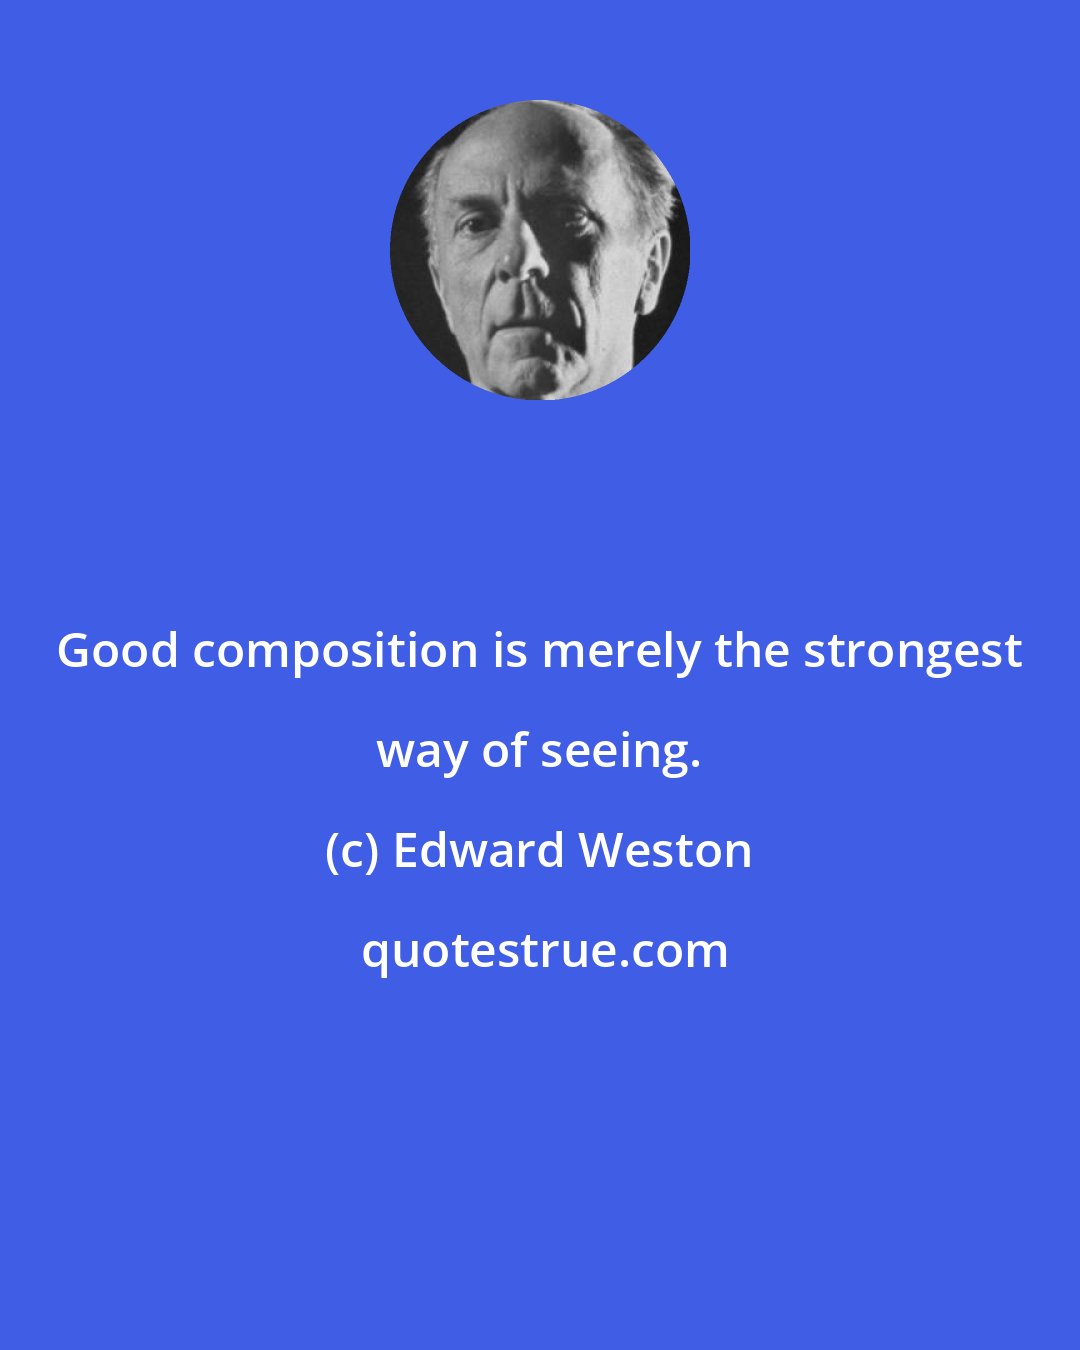 Edward Weston: Good composition is merely the strongest way of seeing.